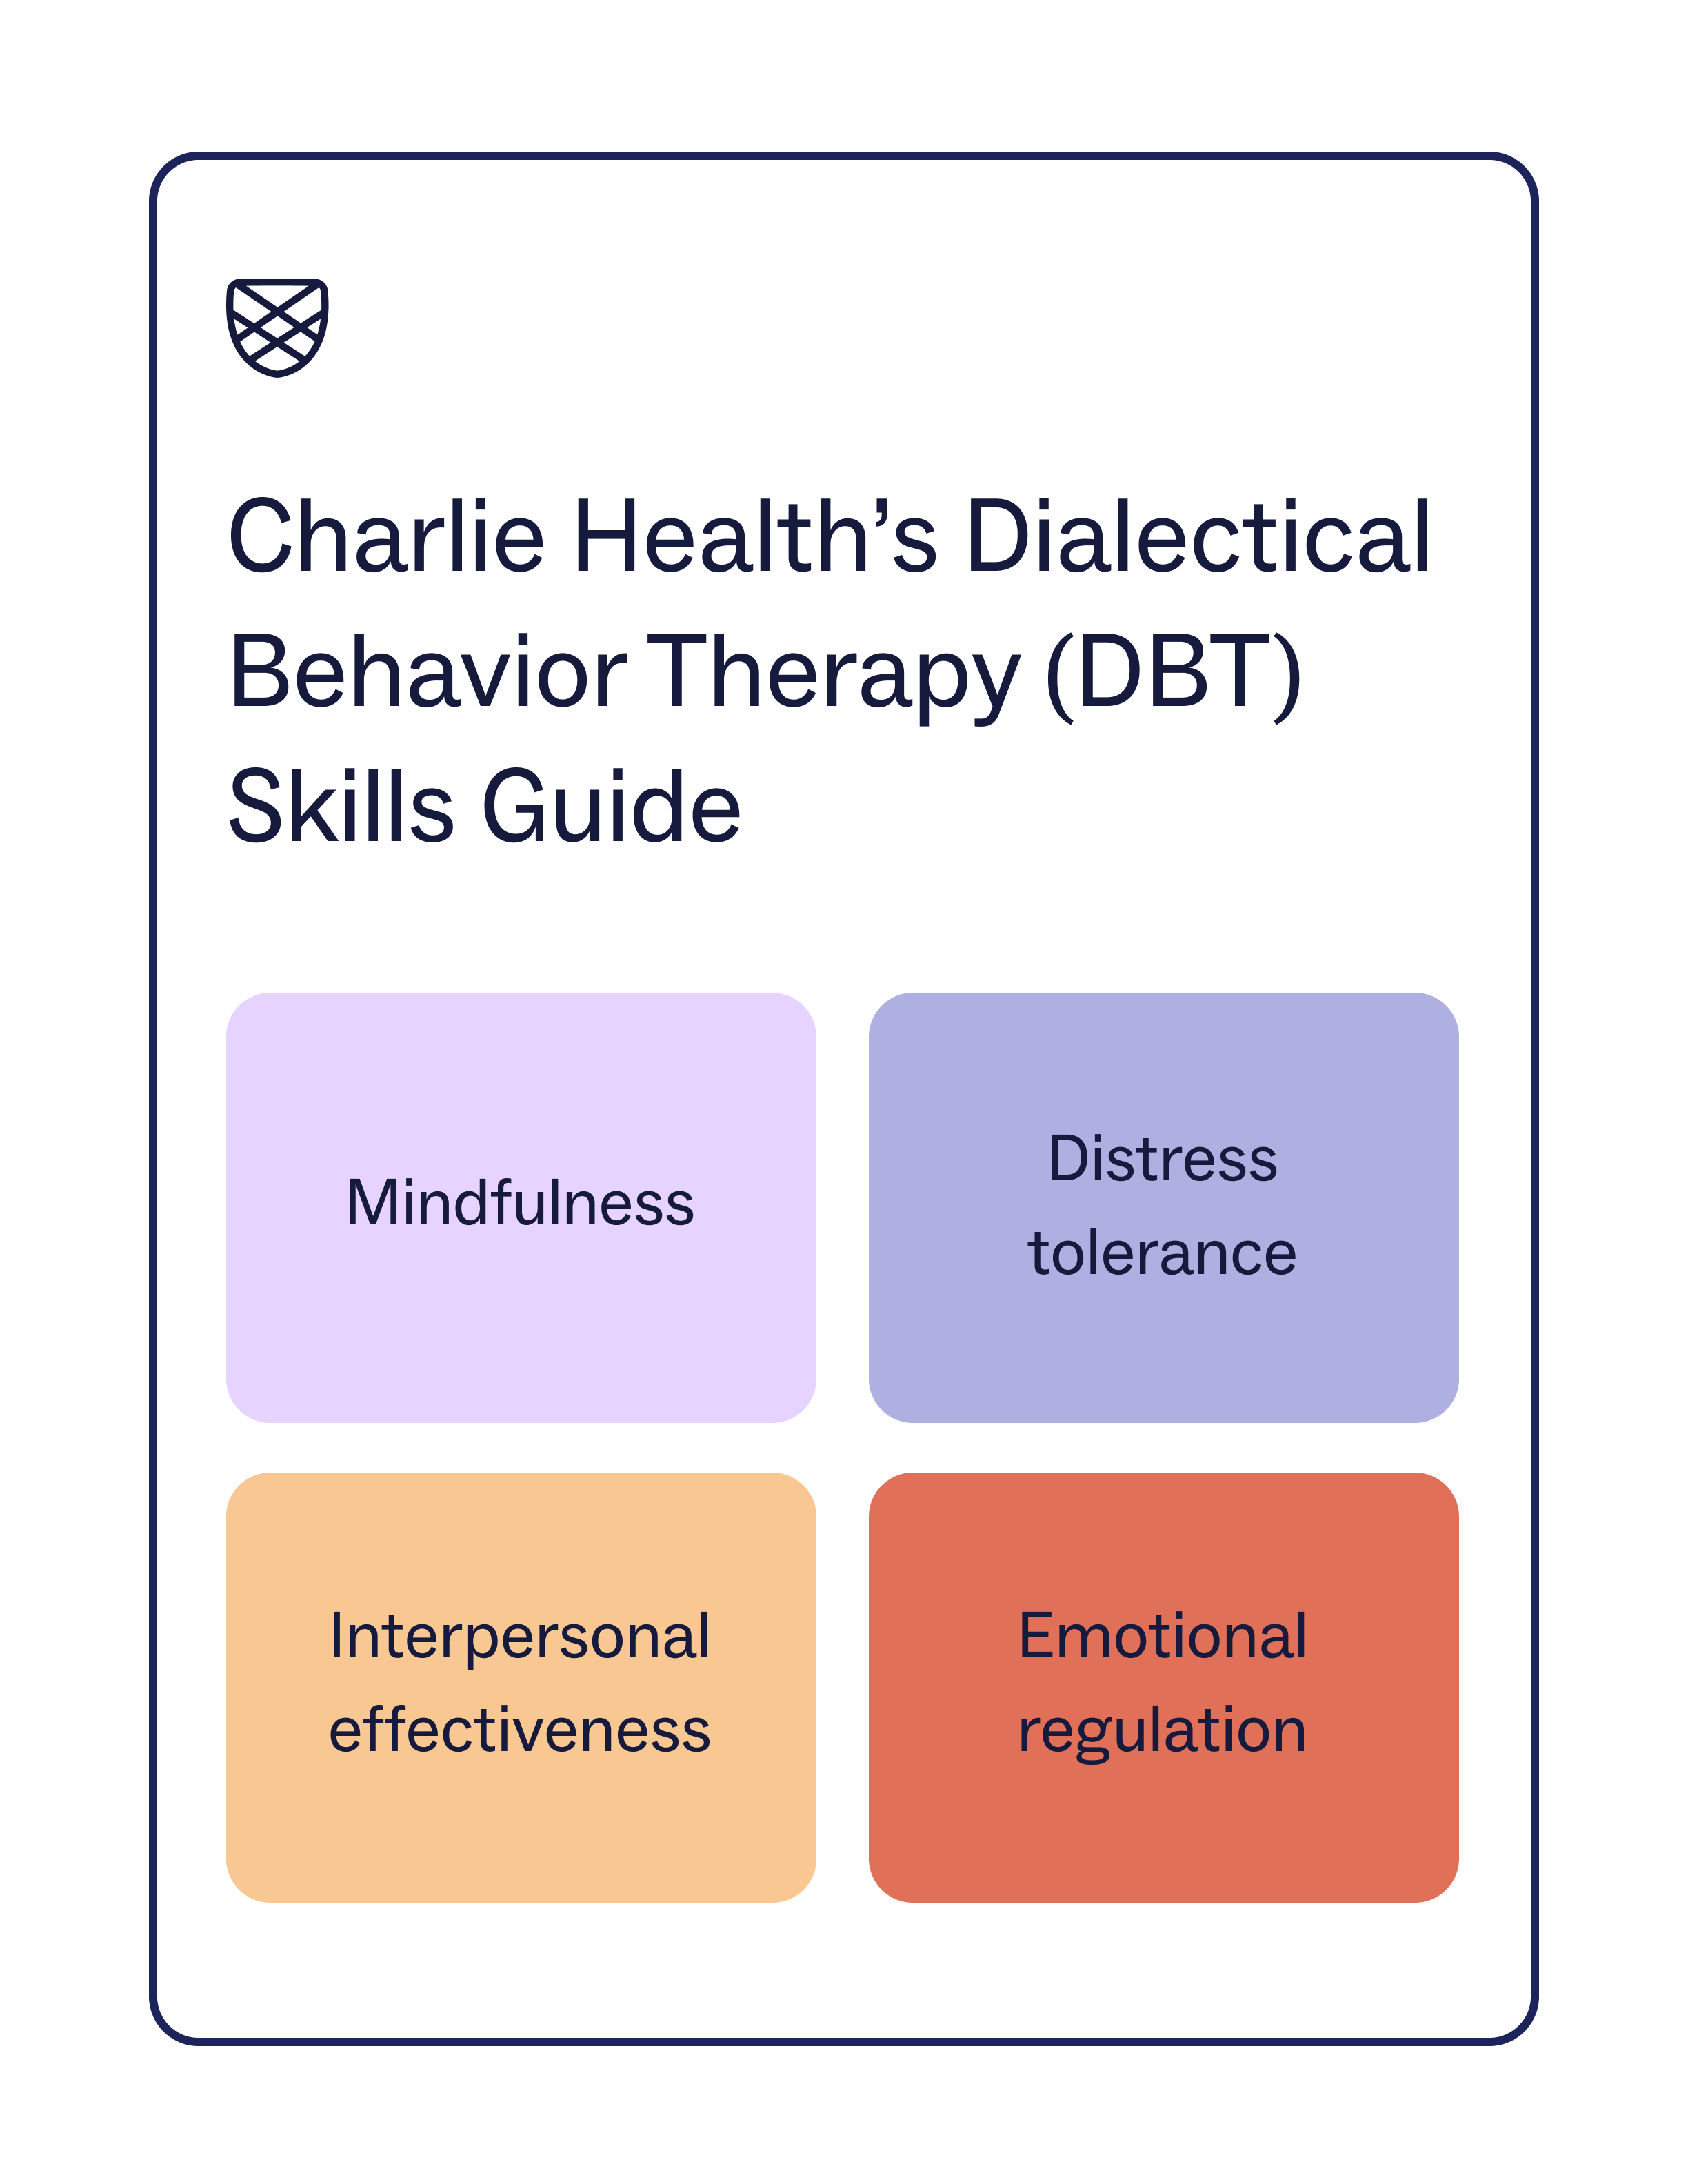 Cover of DBT skills guide